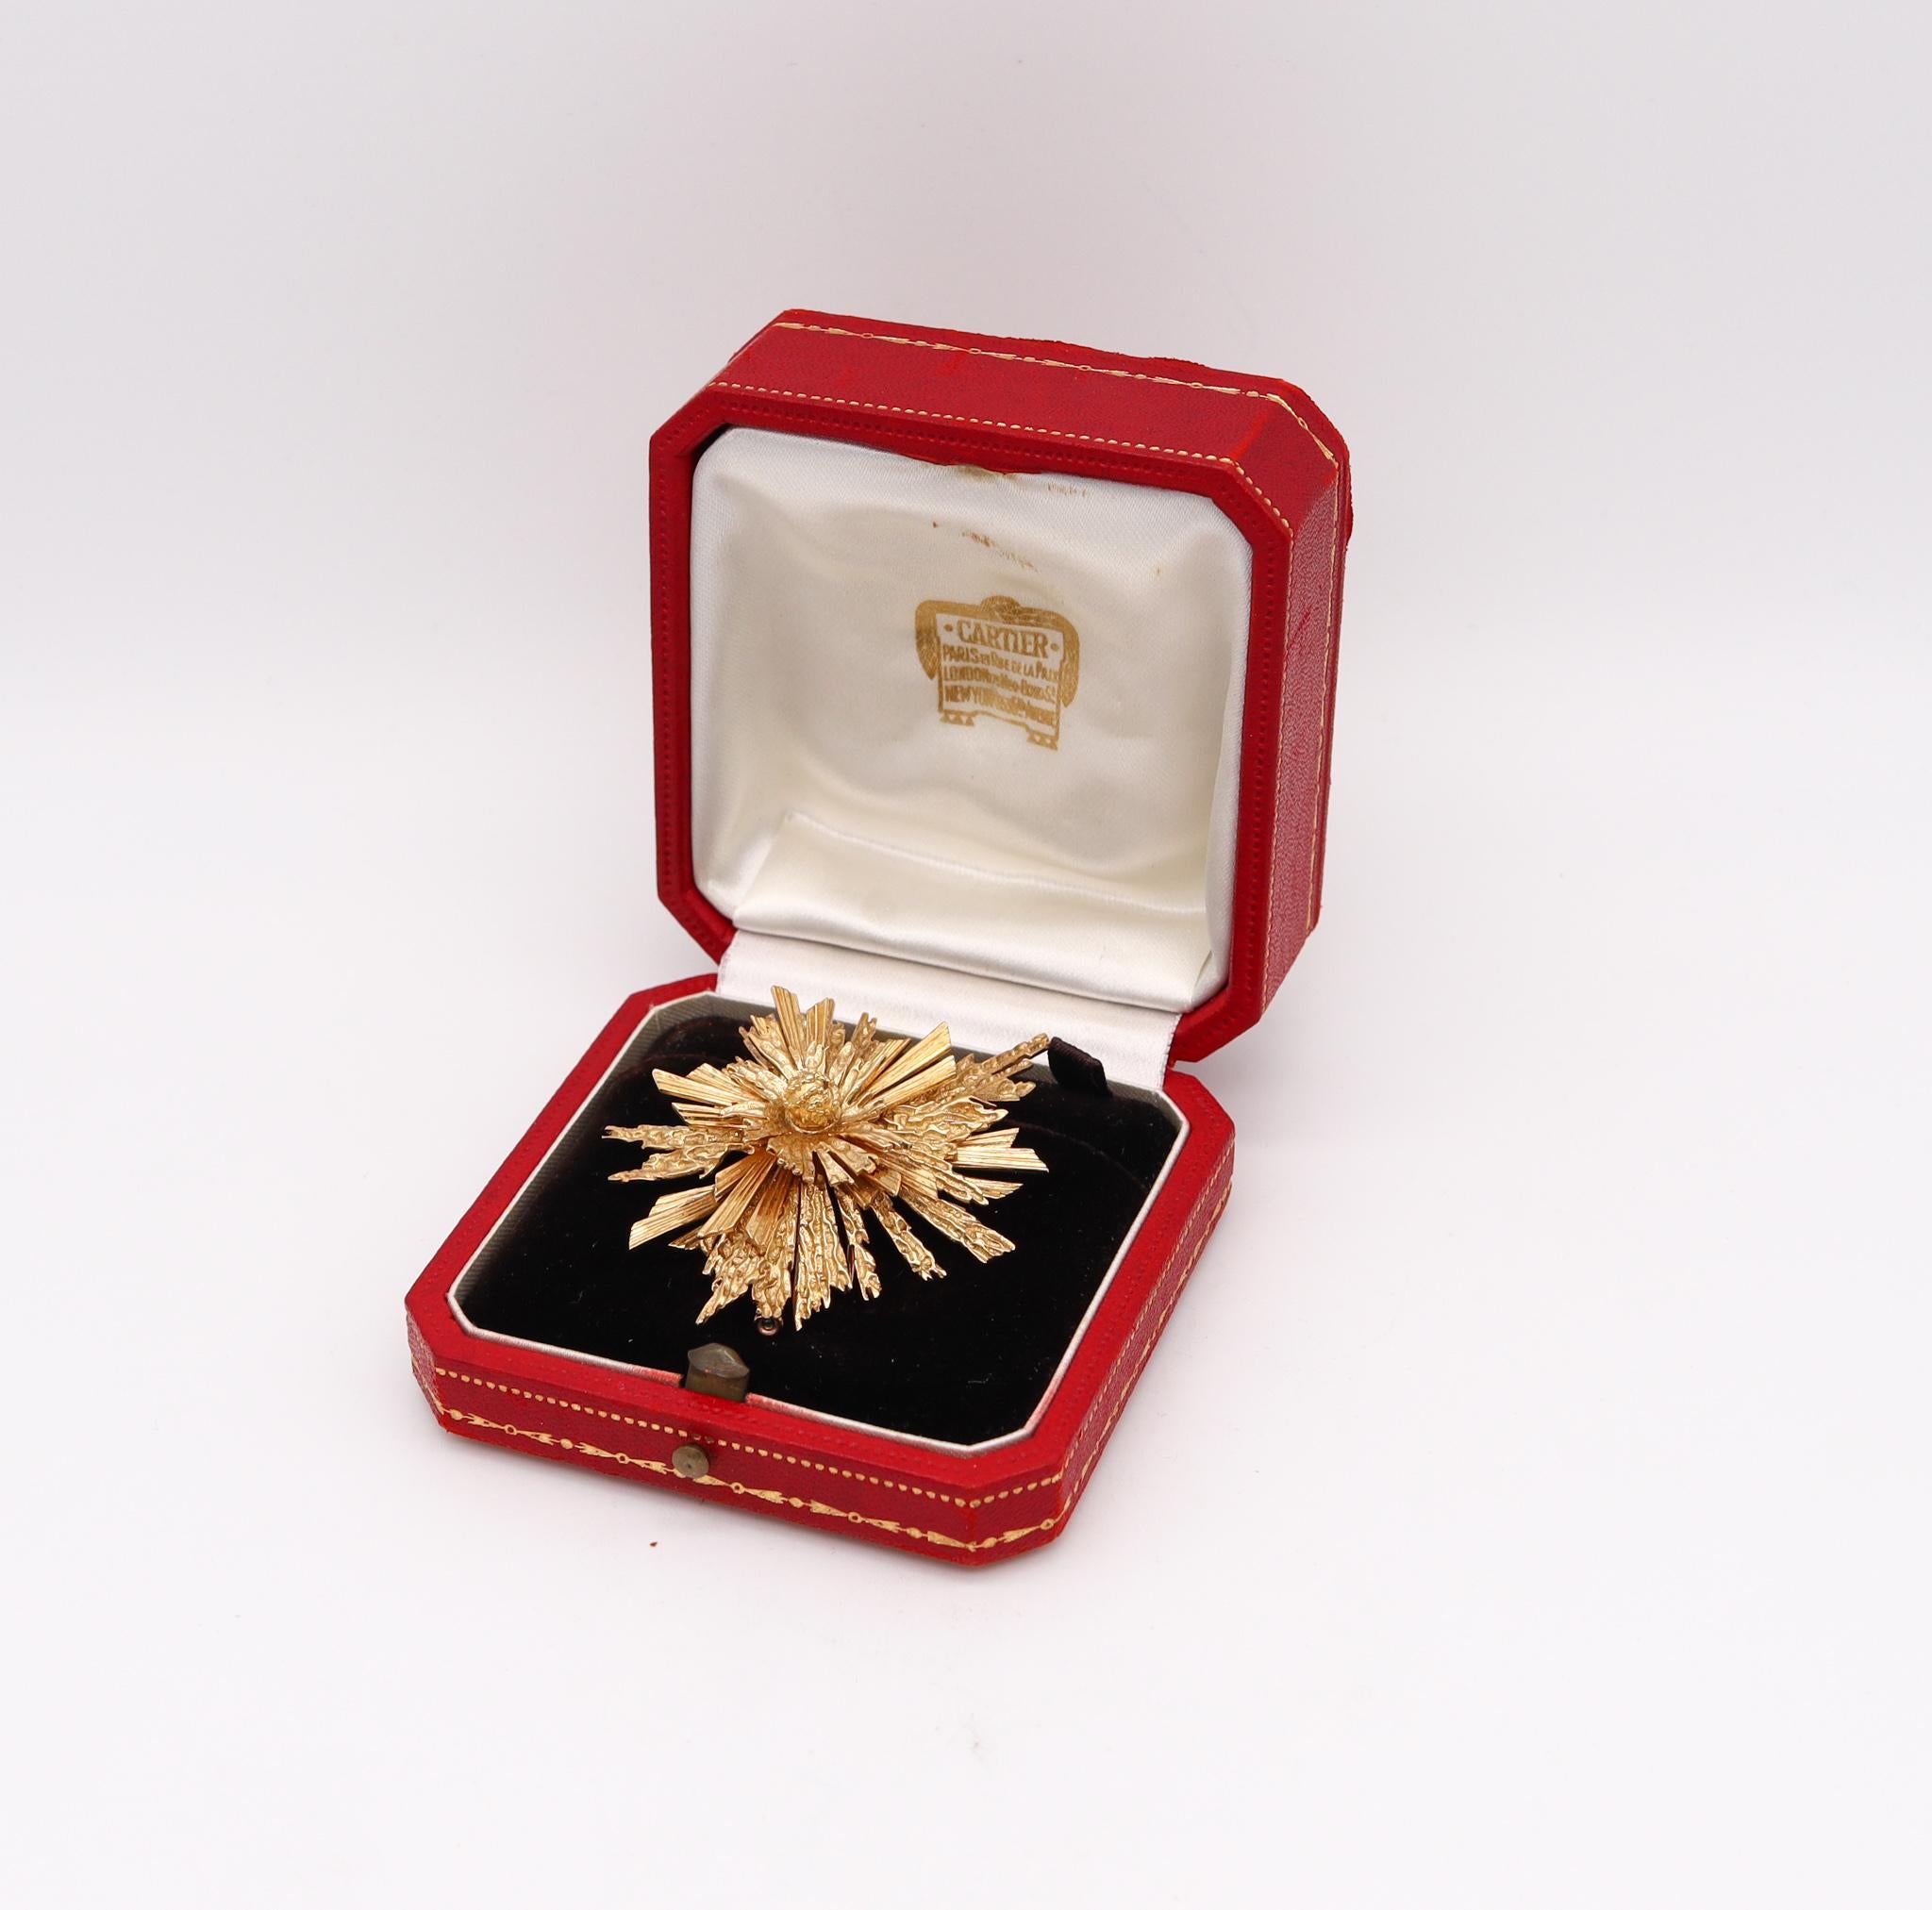 A brutalist brooch designed by Cartier

Beautiful piece made during the postwar period in Paris France by the house of Cartier, back in the 1950. Crafted in the style of brutalist, with spiky and textured patterns in solid yellow gold of 18 karats.